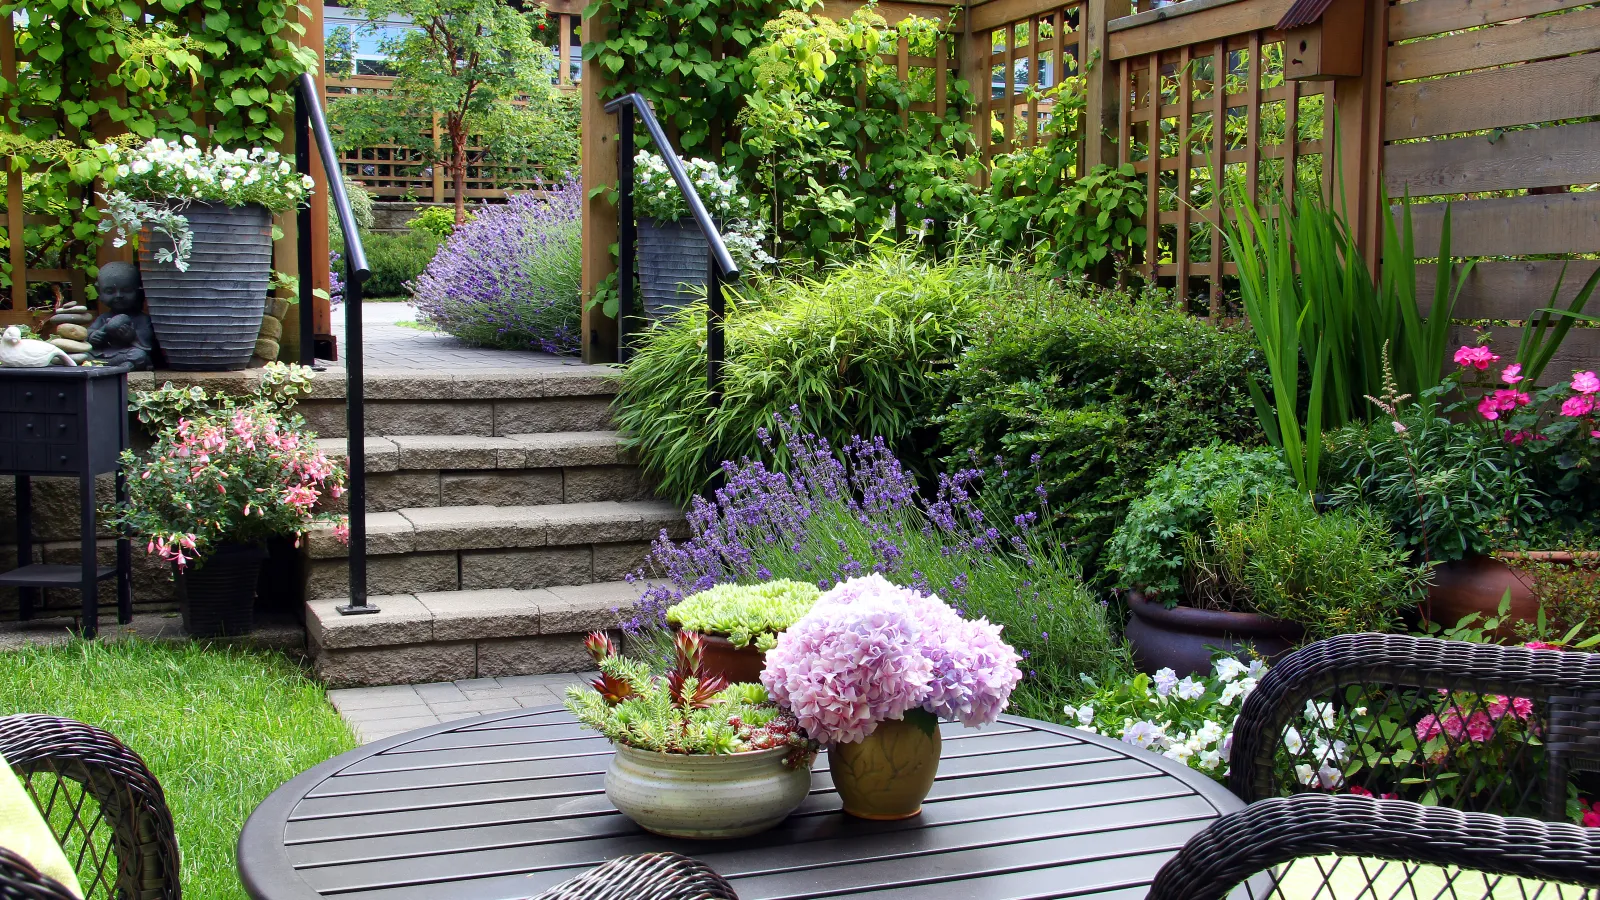 Armstrong landscape design with salvia, pots with flowers, vines, succulents and a patio set